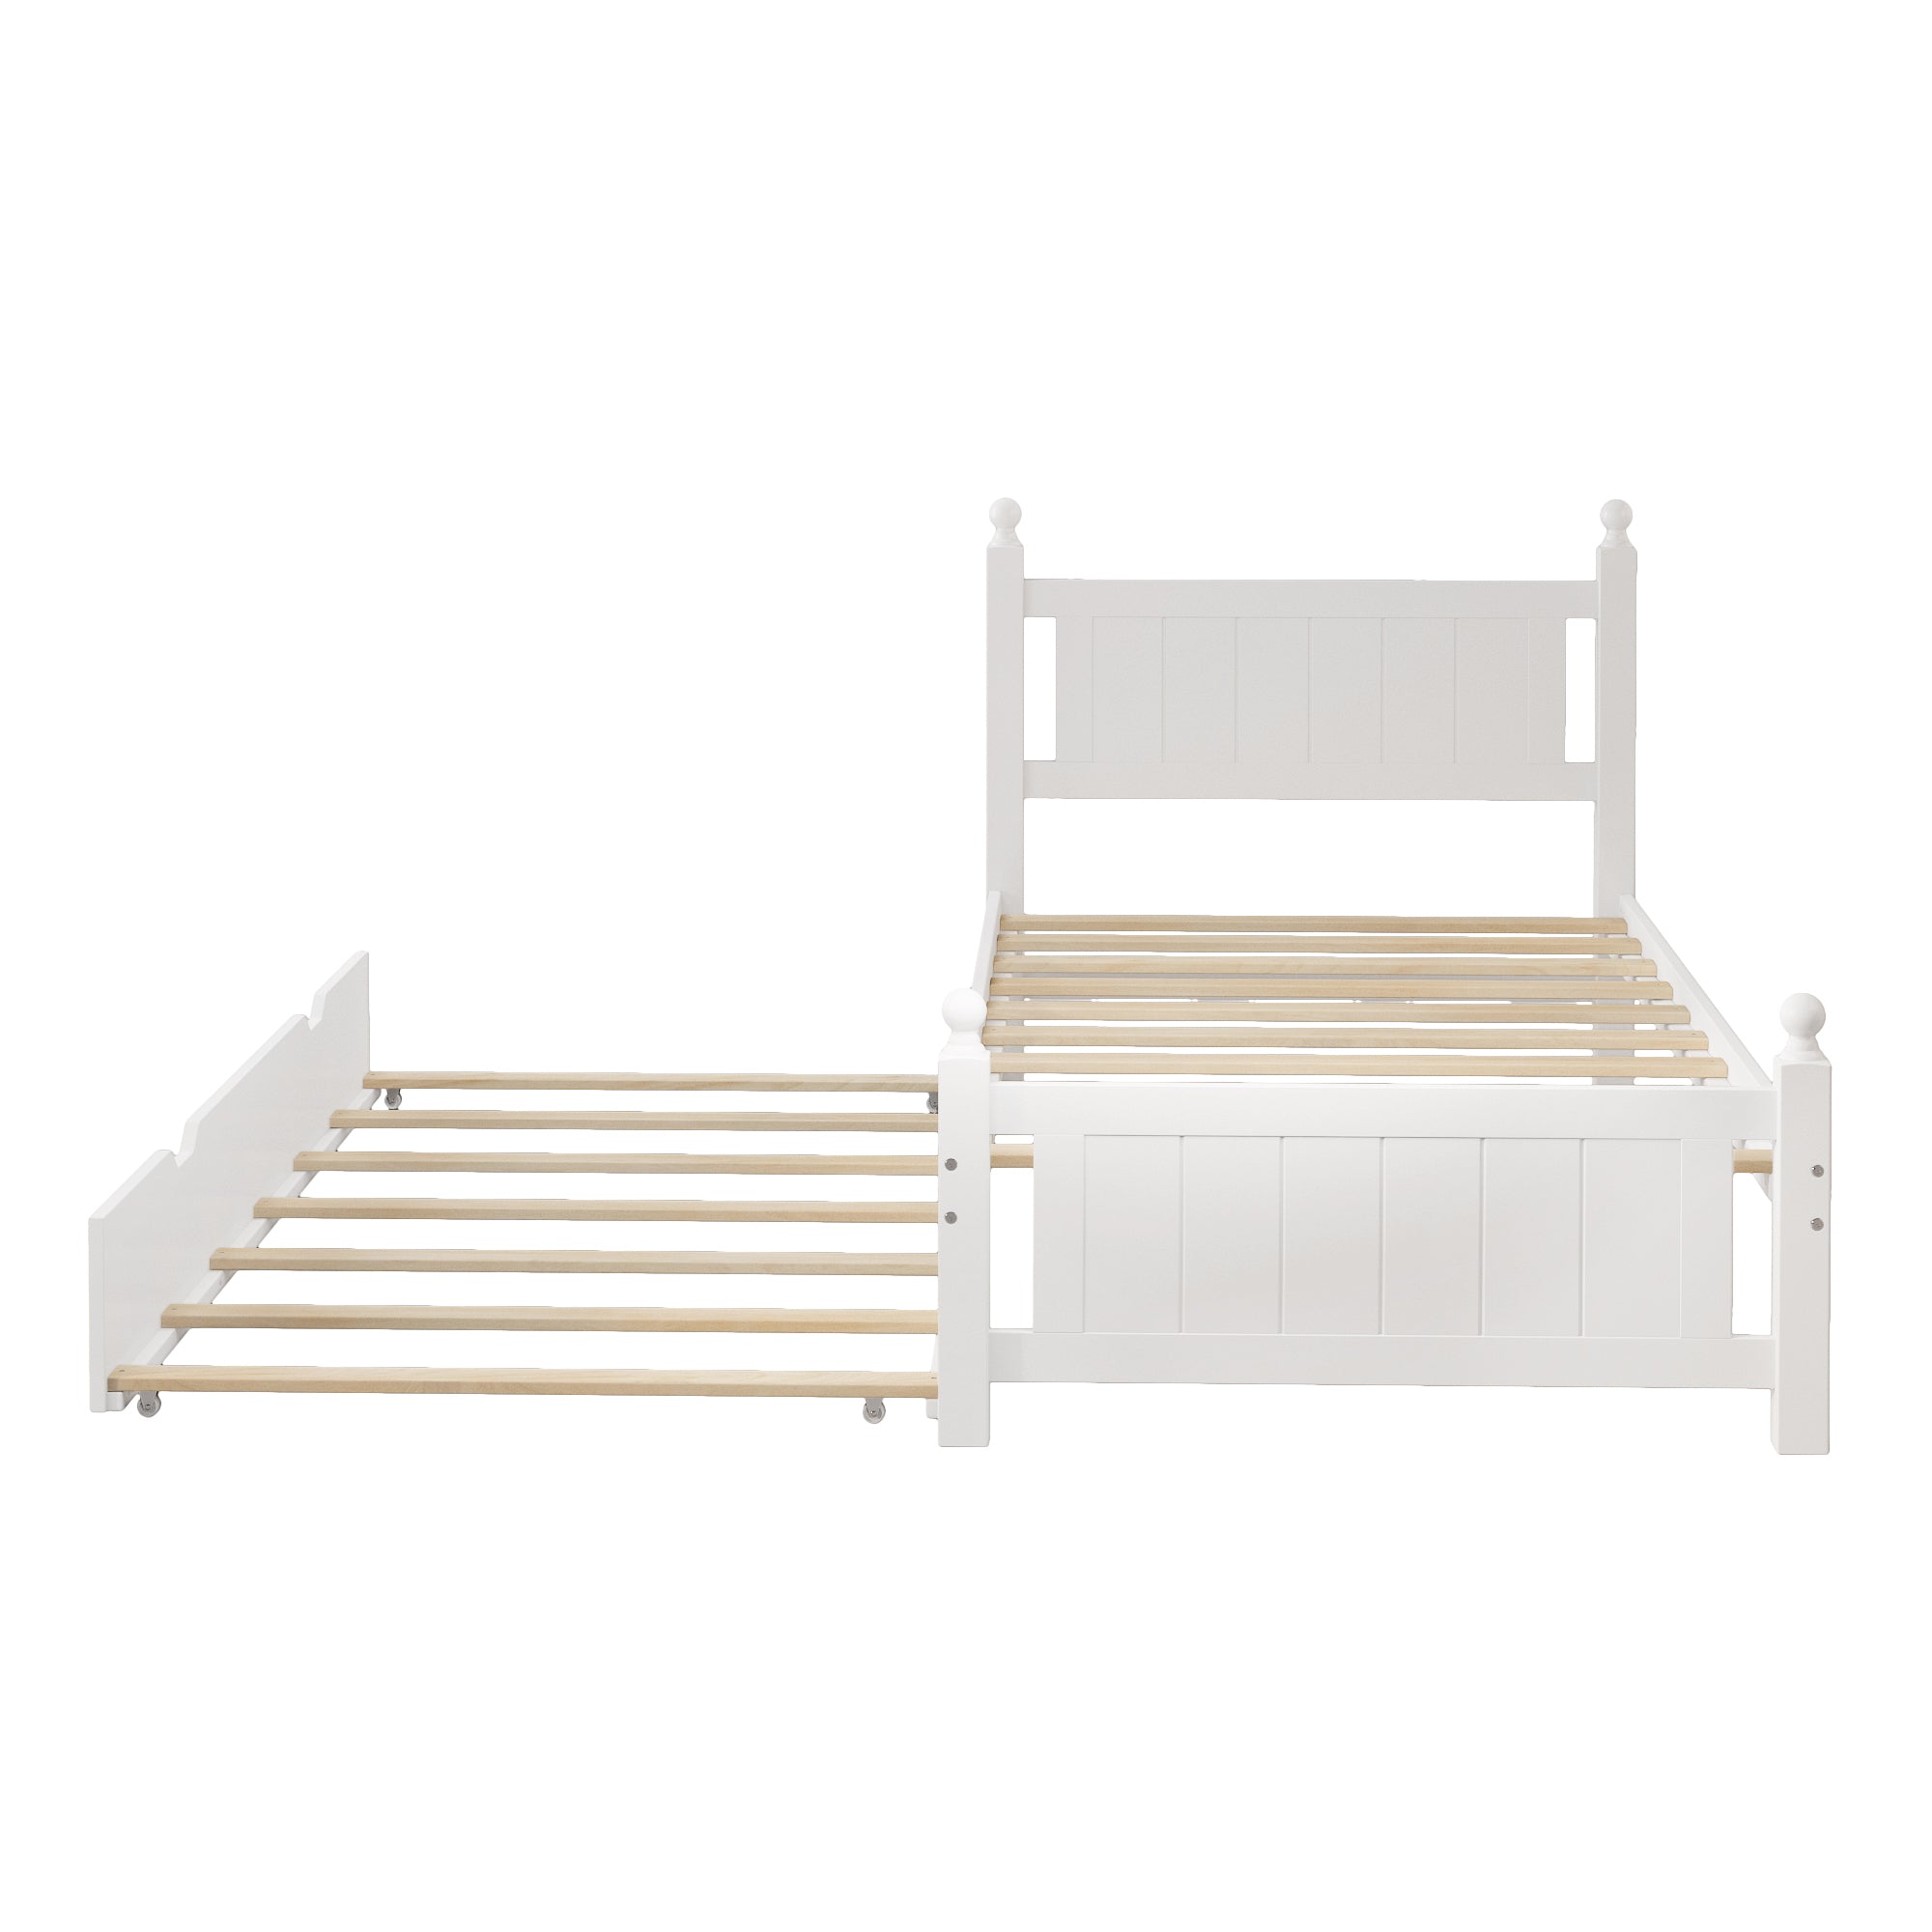 Twin Size Solid Wood Platform Bed Frame with trundle box spring not